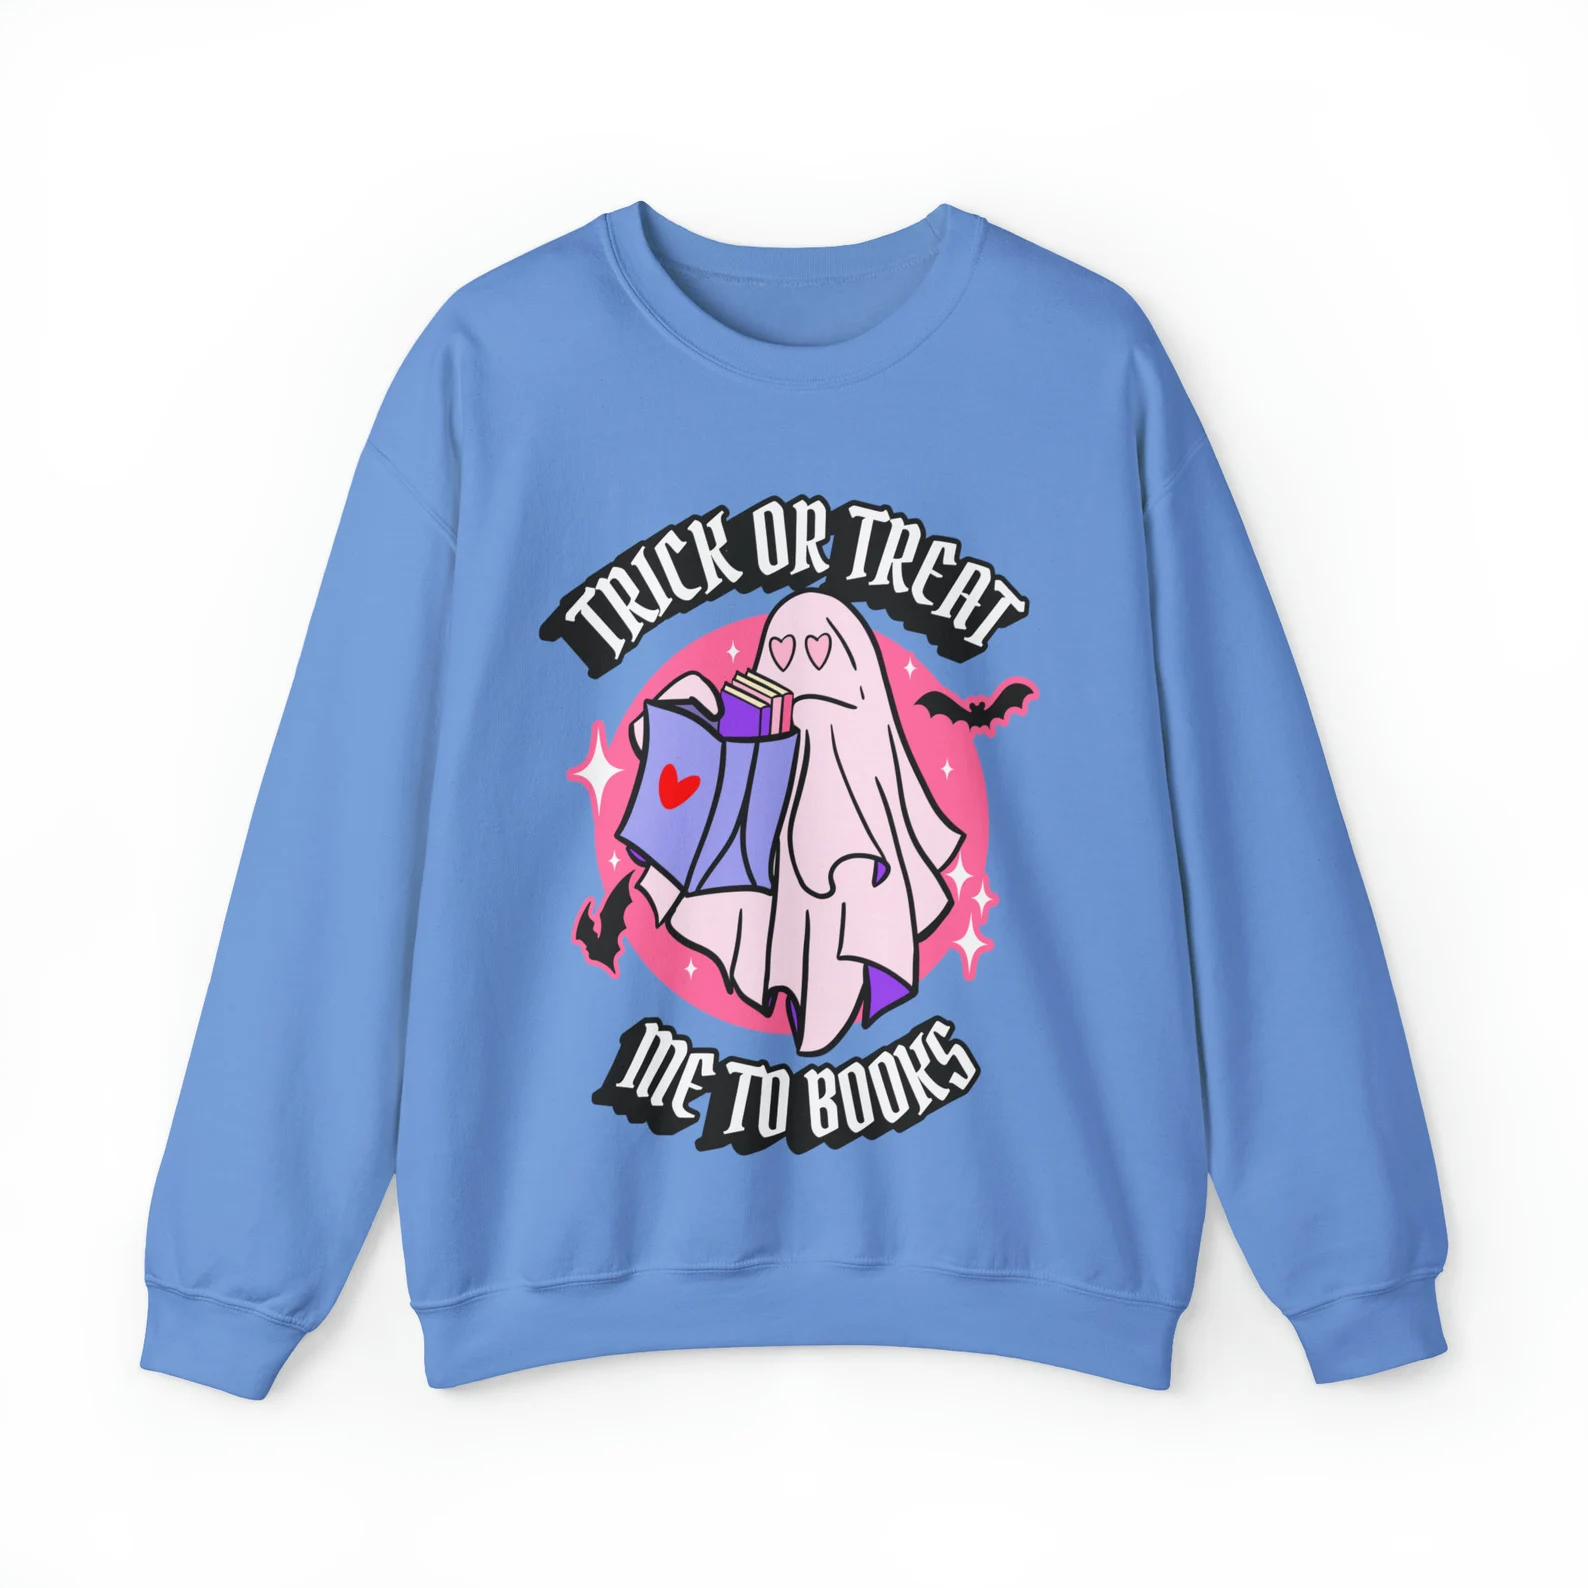 Image of a ghost trick or treating on a blue sweatshirt. It says "trick or treat me to books."